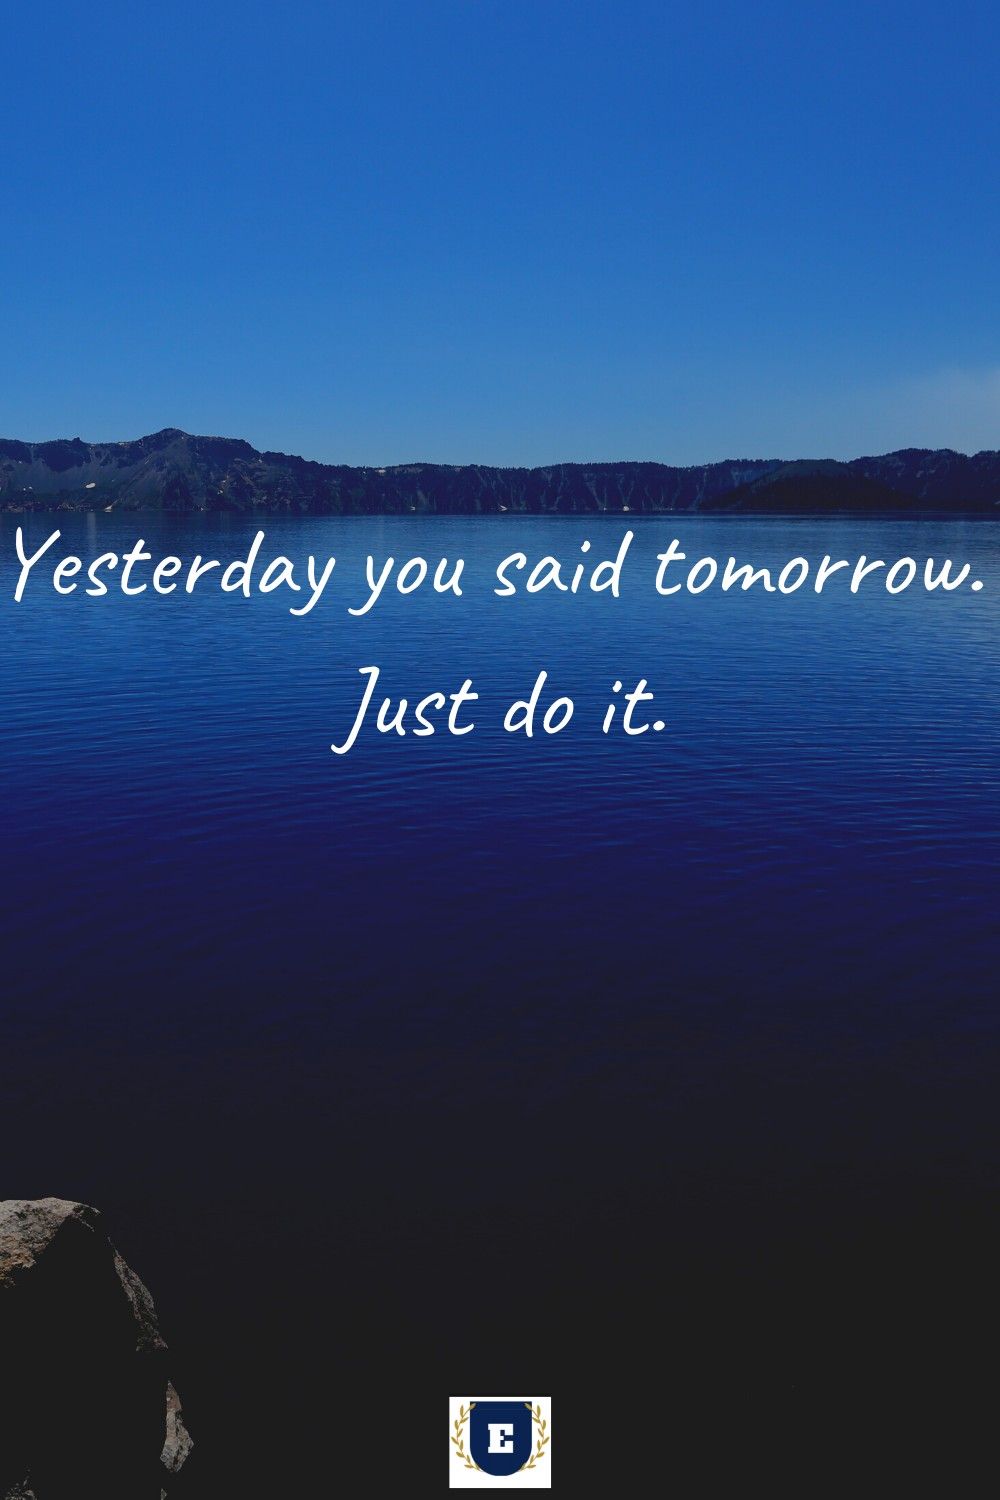 Wallpaper. Background. Best Quotes. The Edeocy. Best quotes, Wallpaper, Yesterday you said tomorrow